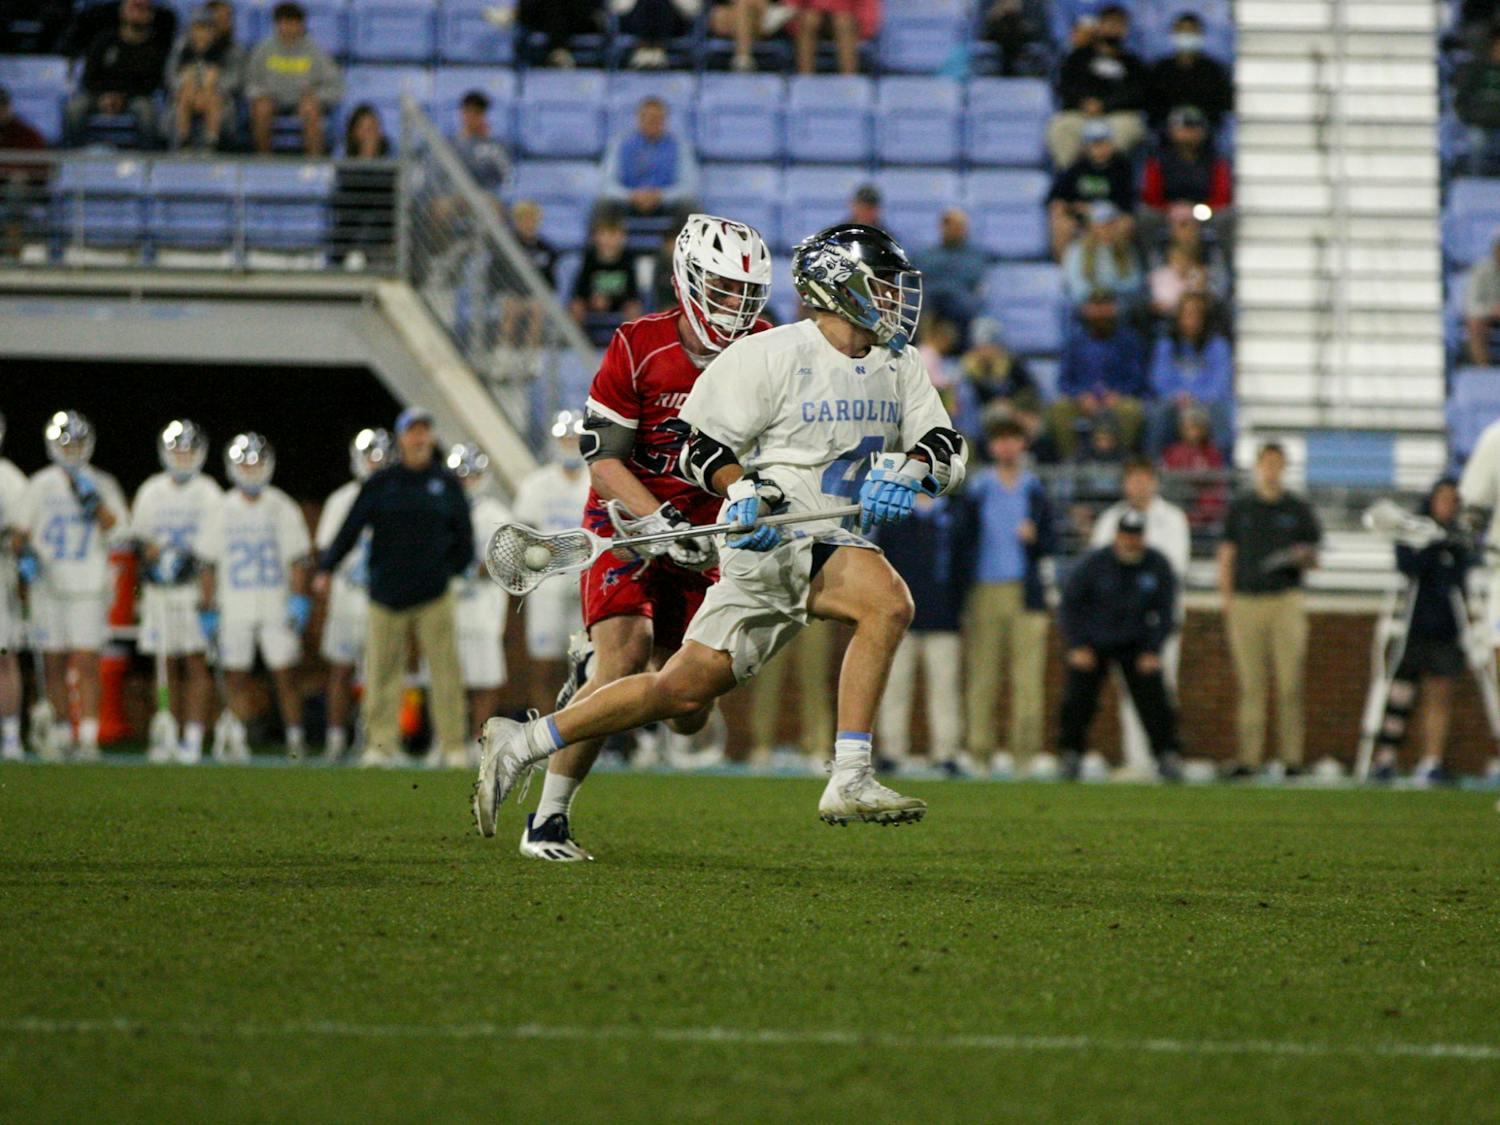 Graduate attackman Chris Gray (4) sprints past his defender to the goal on February 11, 2022 at Dorrance Field. UNC won their season opener against Richmond 13-9. 